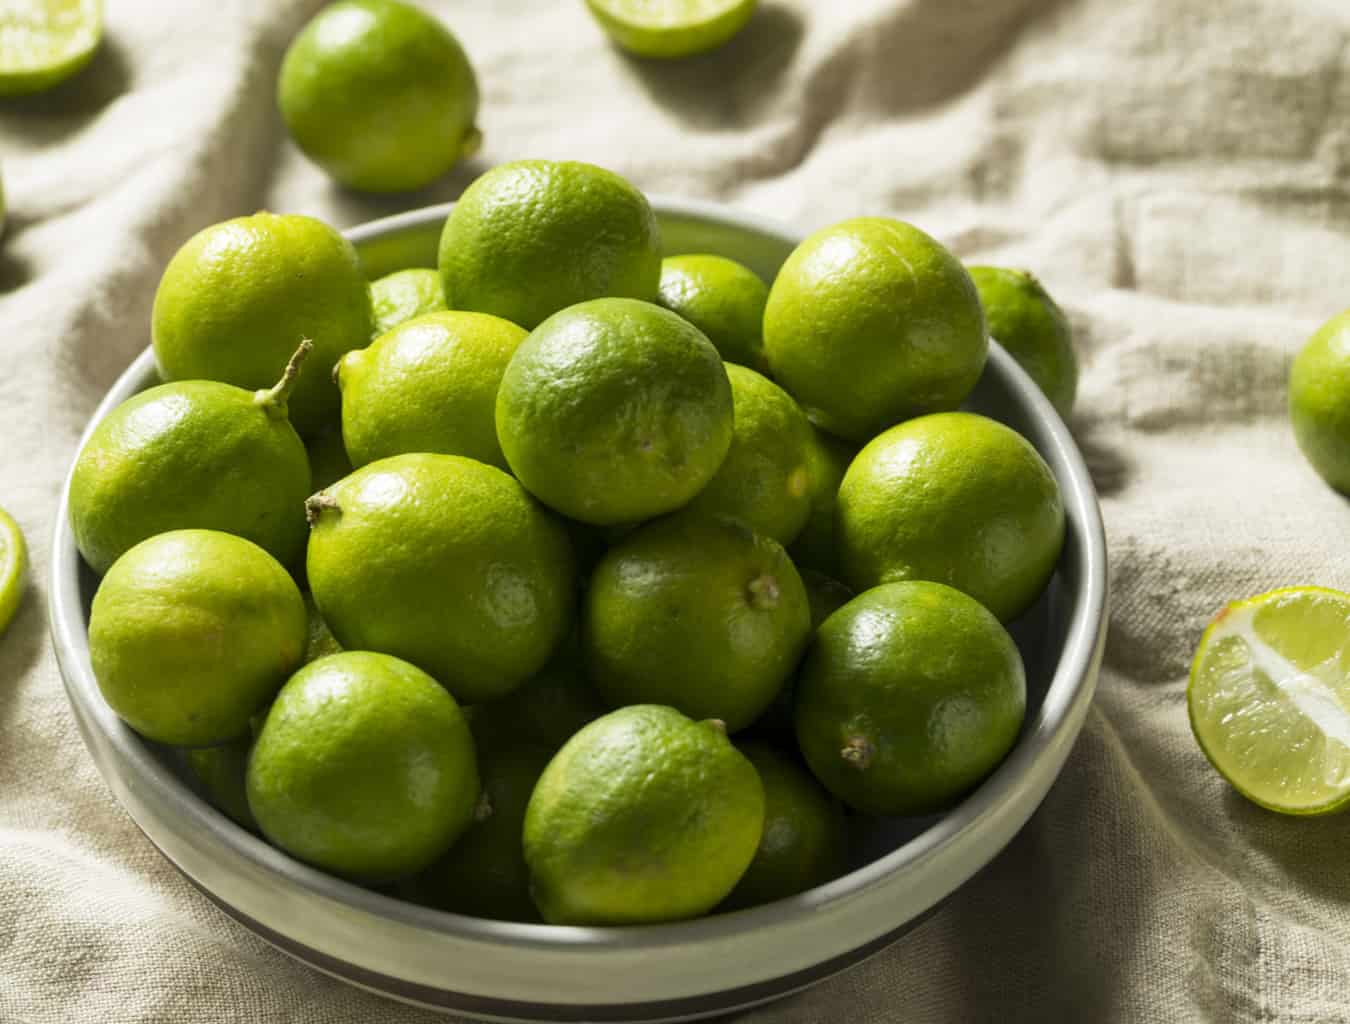 key limes in a bowl on table cloth